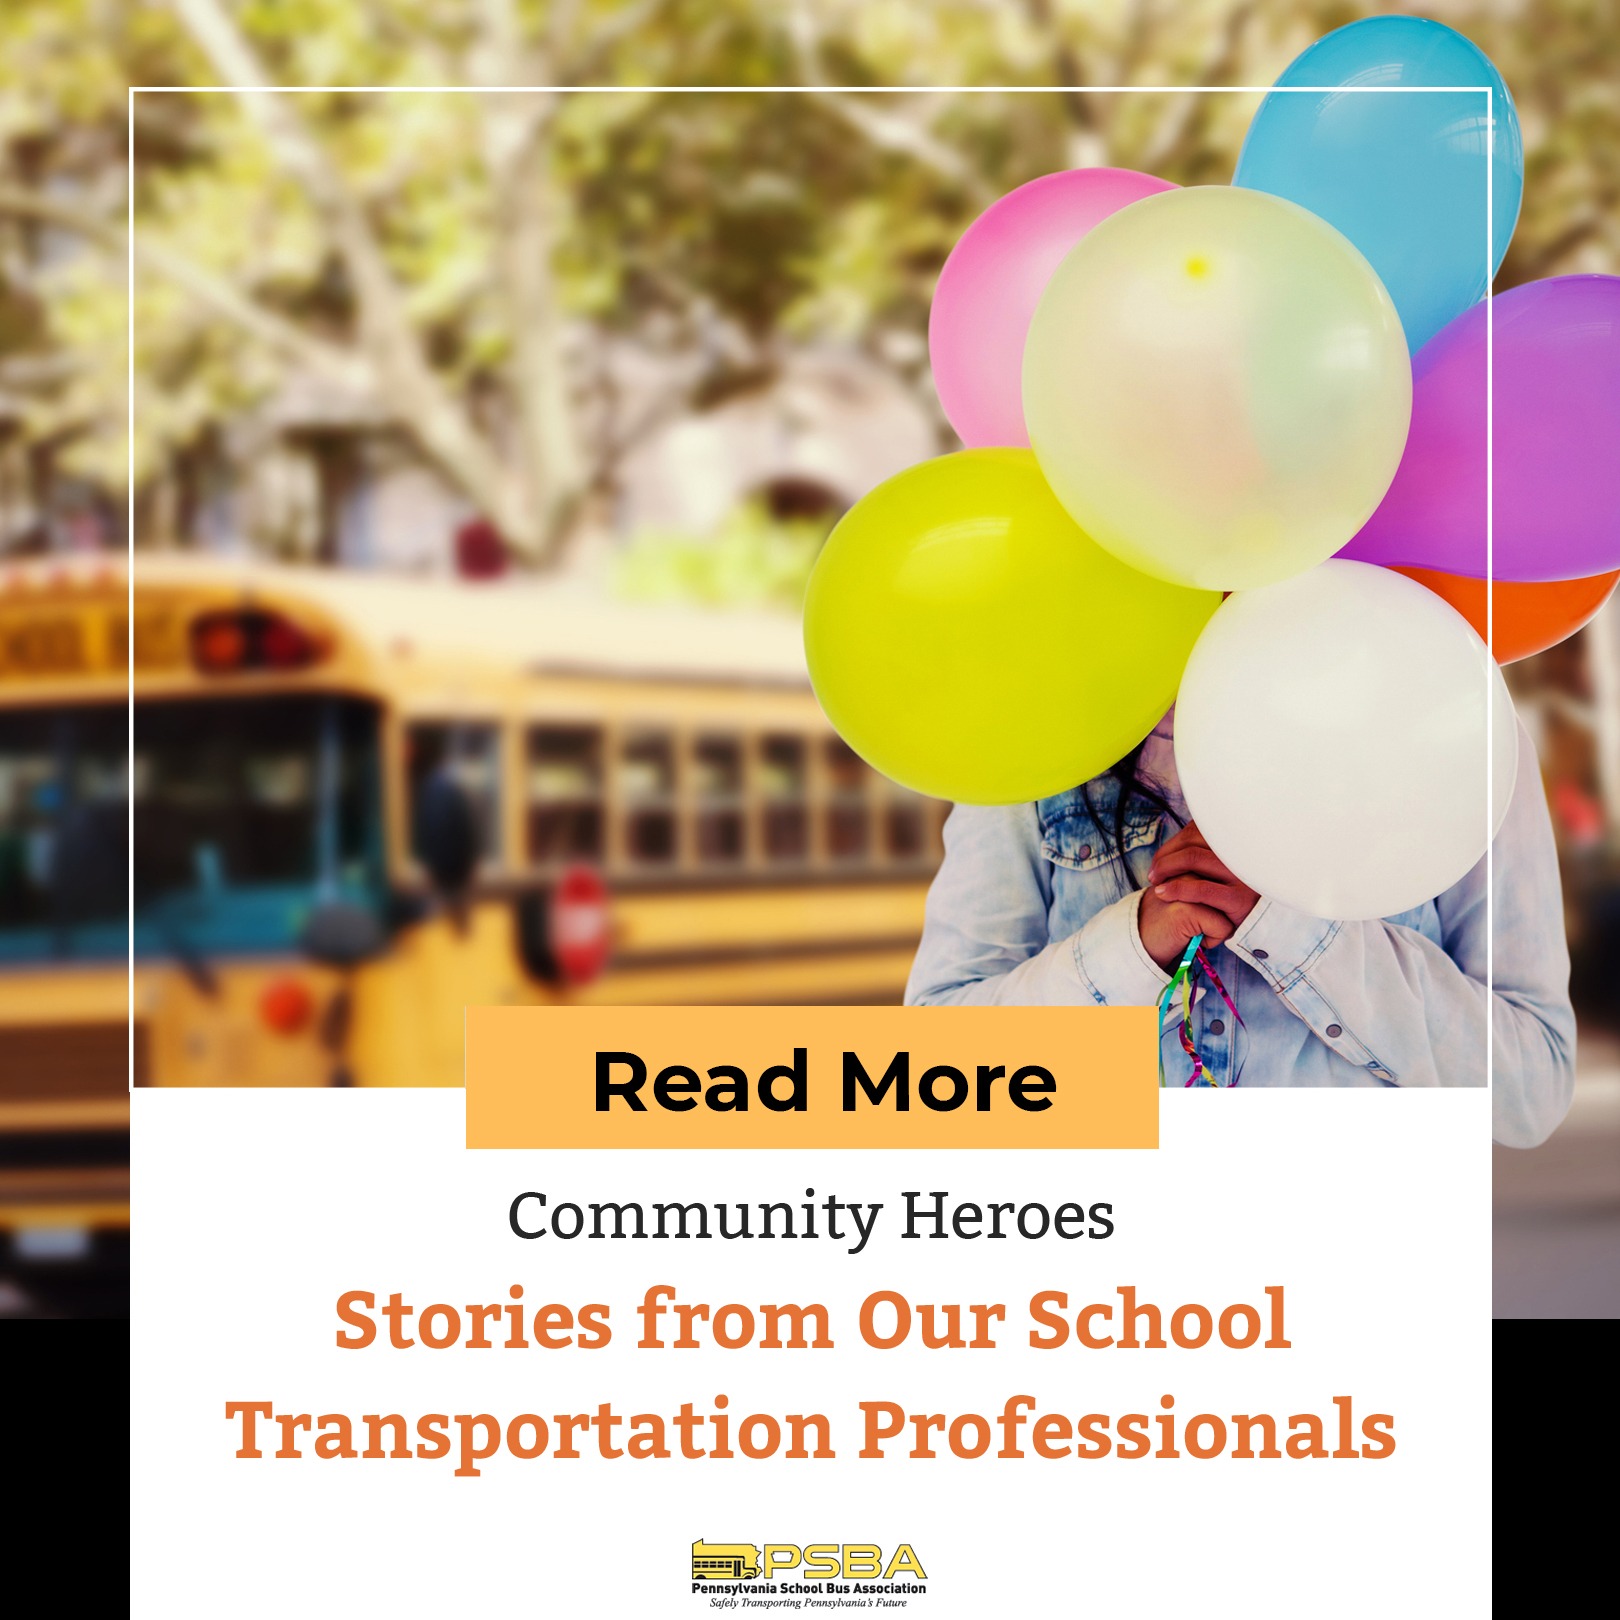 Community Heroes and Our School Transportation Professionals